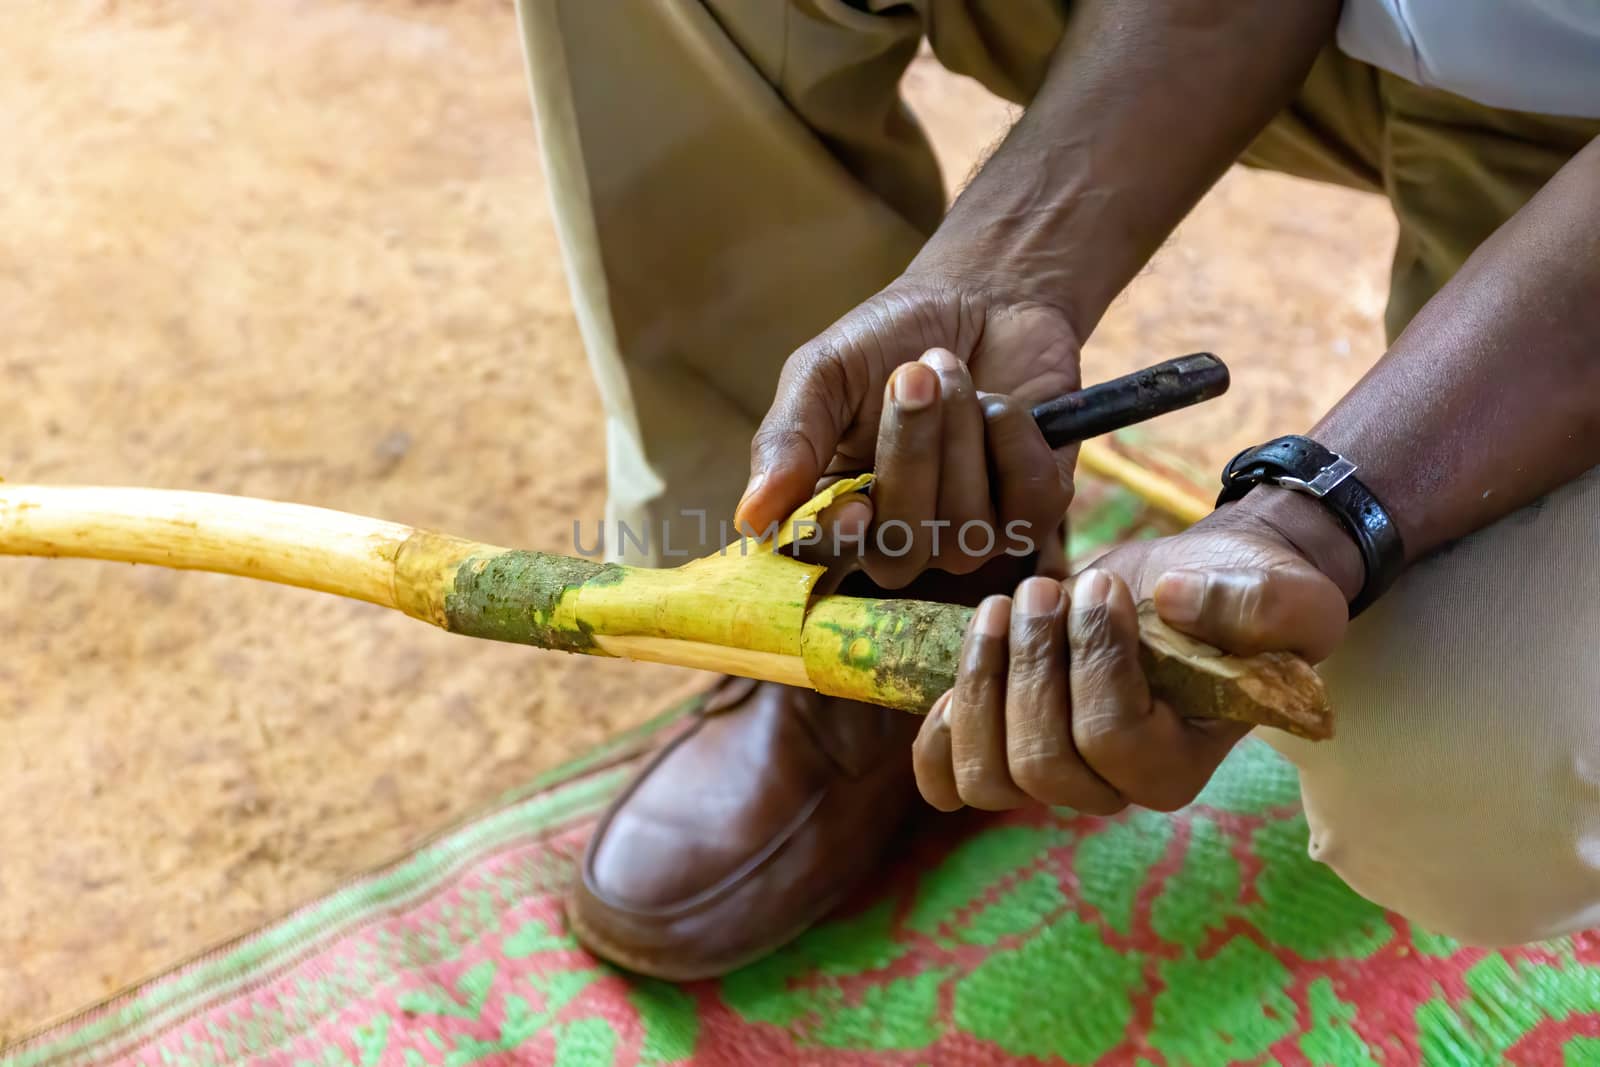 Farmer cutting pieces of a cinnamon tree for tasting purpose during a Spice Tour on Sri Lanka